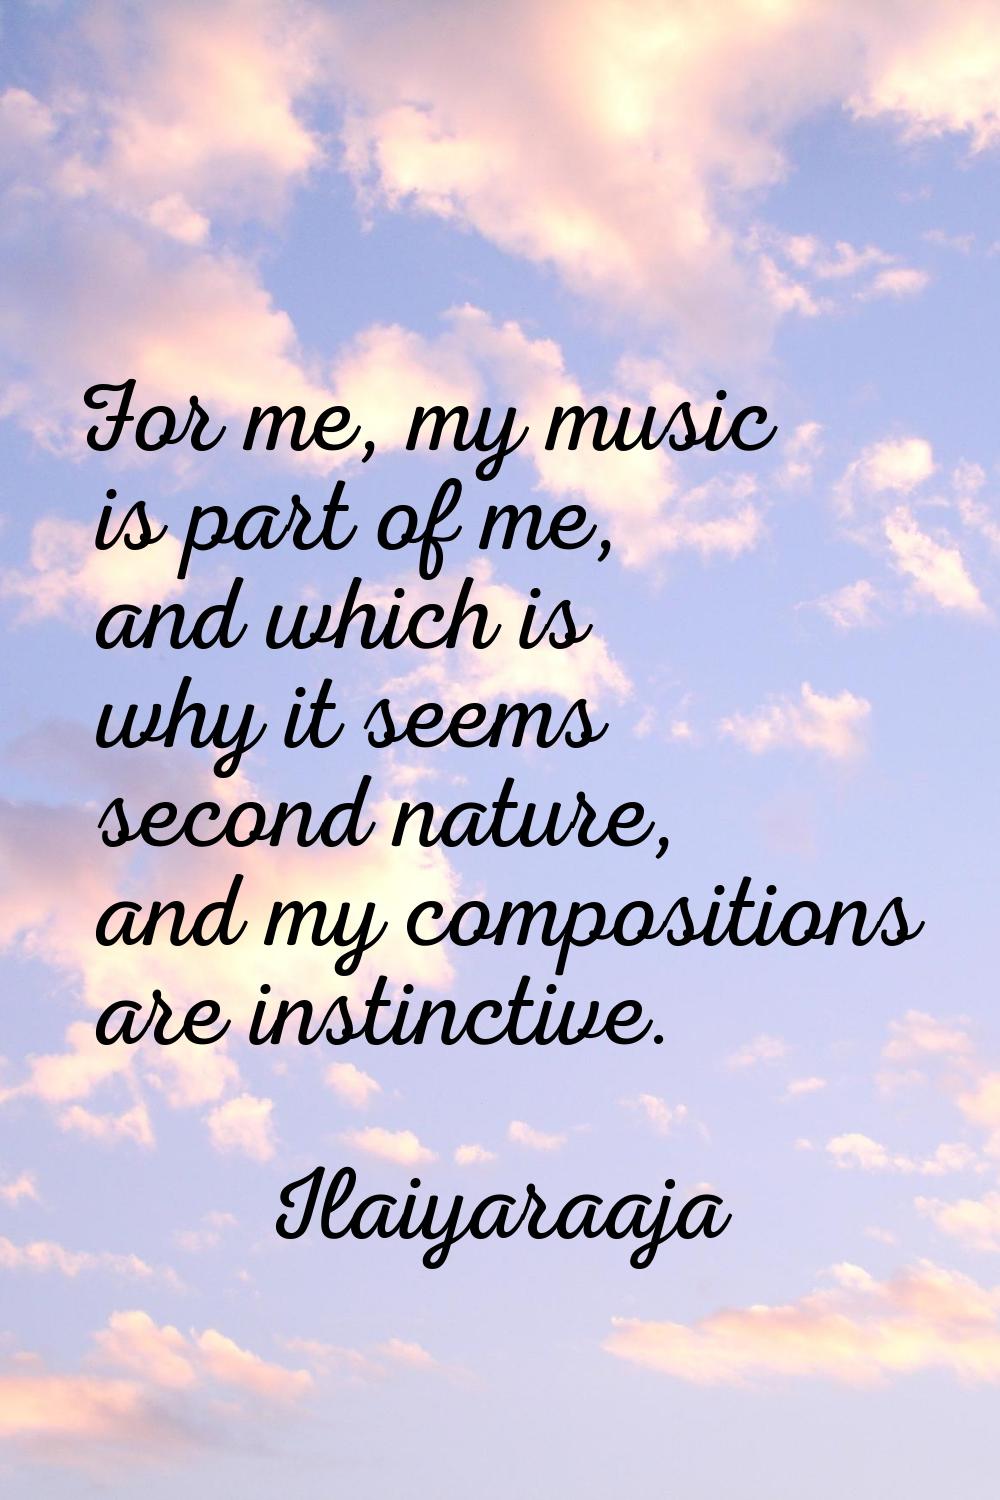 For me, my music is part of me, and which is why it seems second nature, and my compositions are in